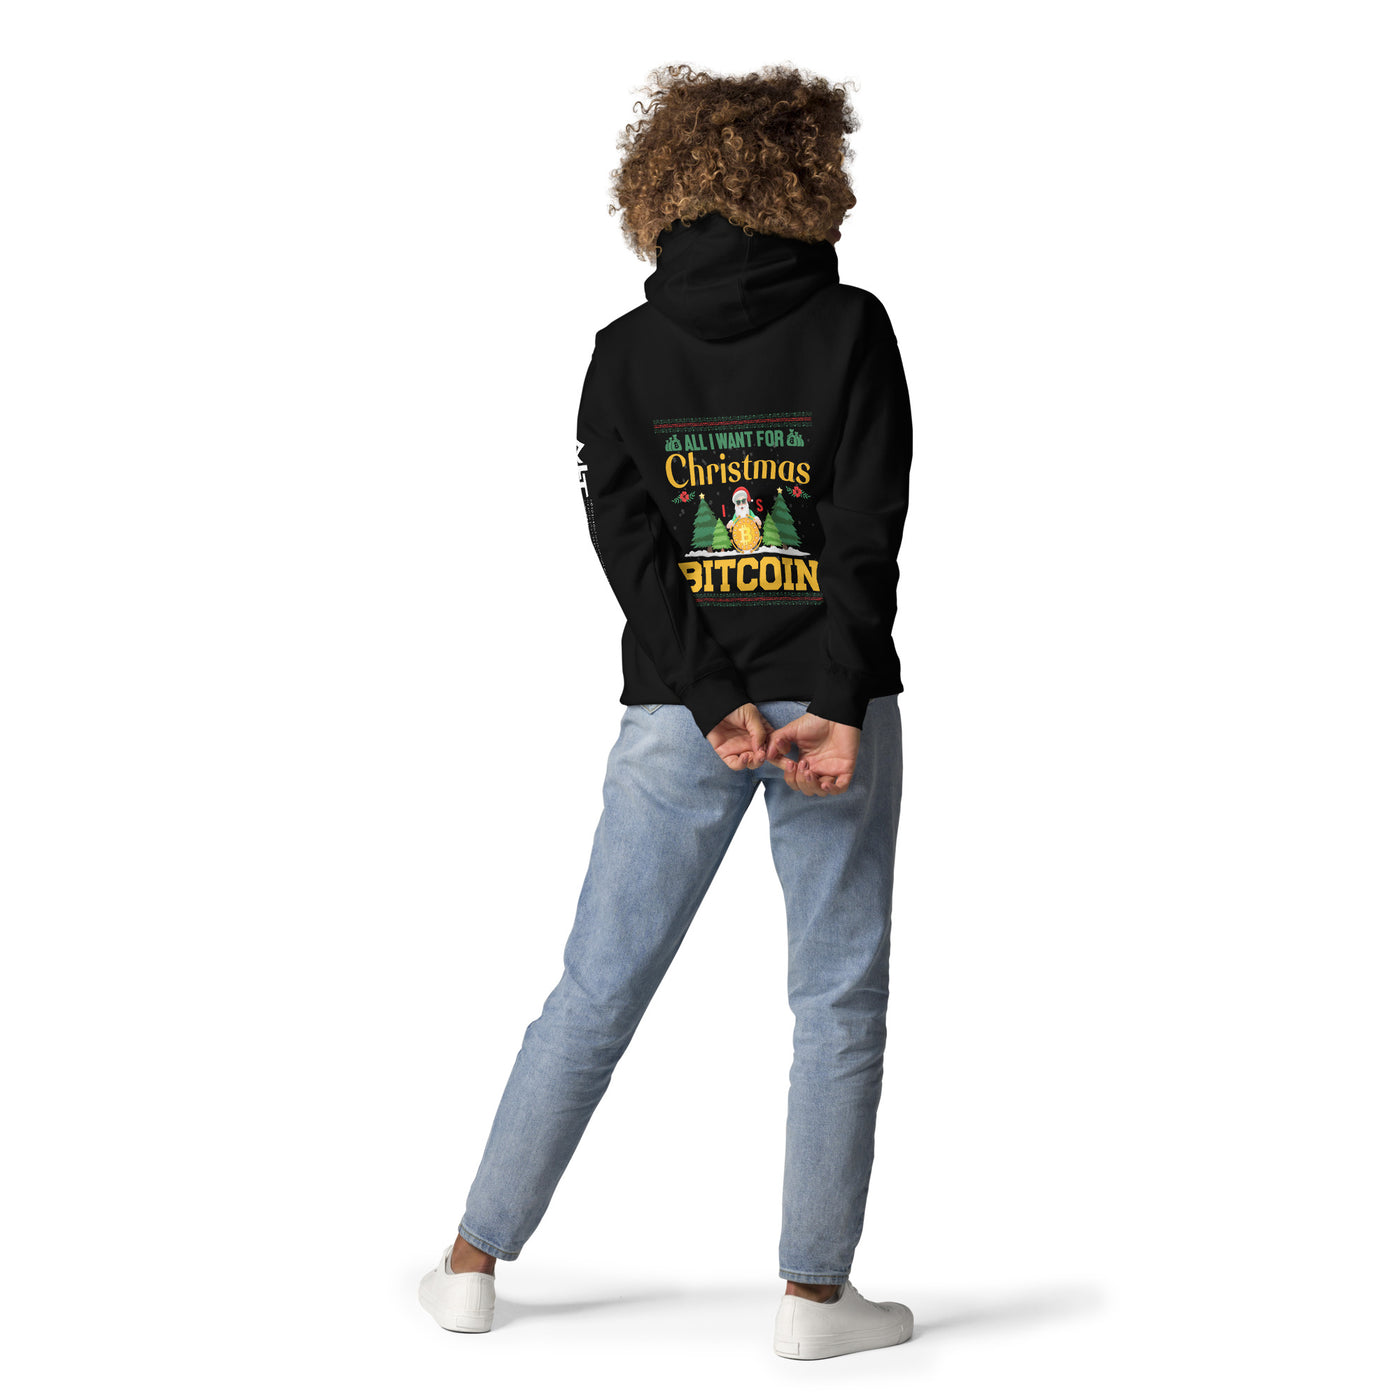 All I want for Christmas is Bitcoin Unisex Hoodie ( Back Print )